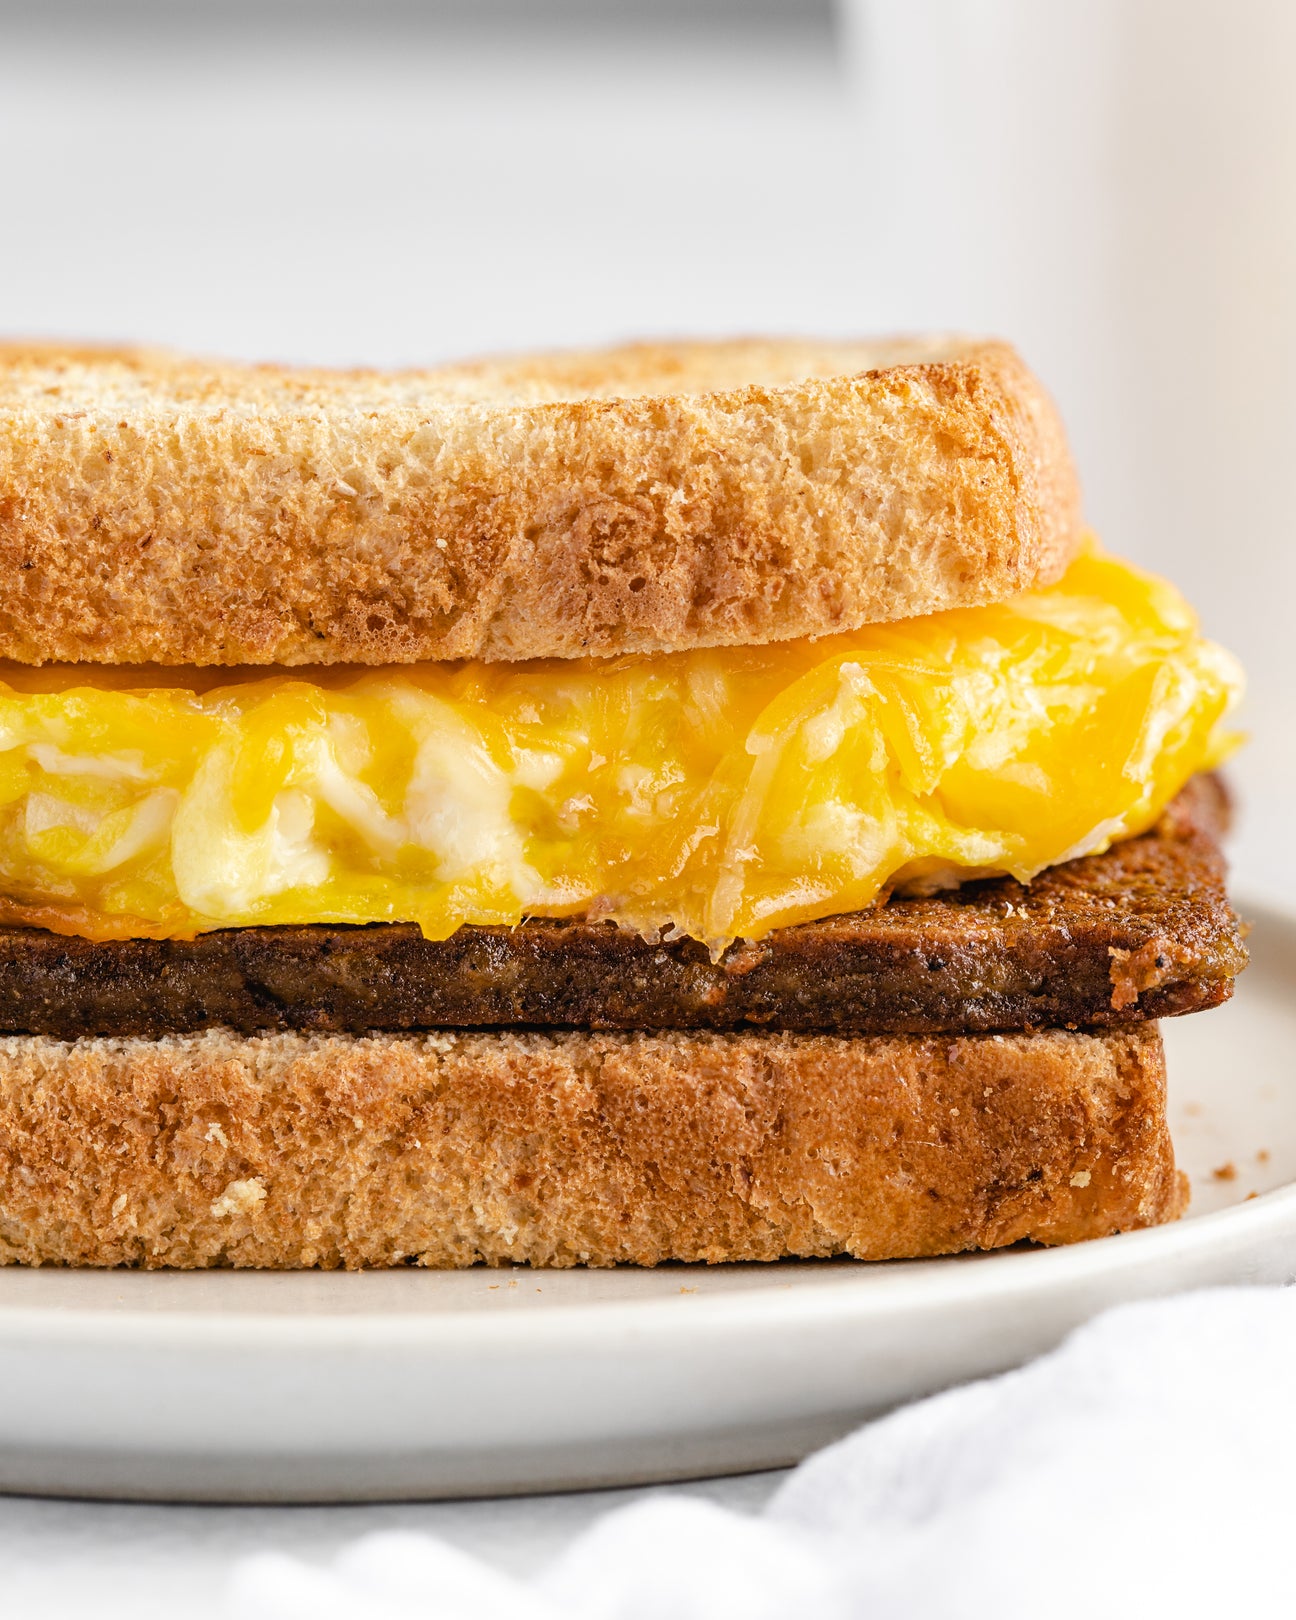 Scrapple egg and cheese sandwich